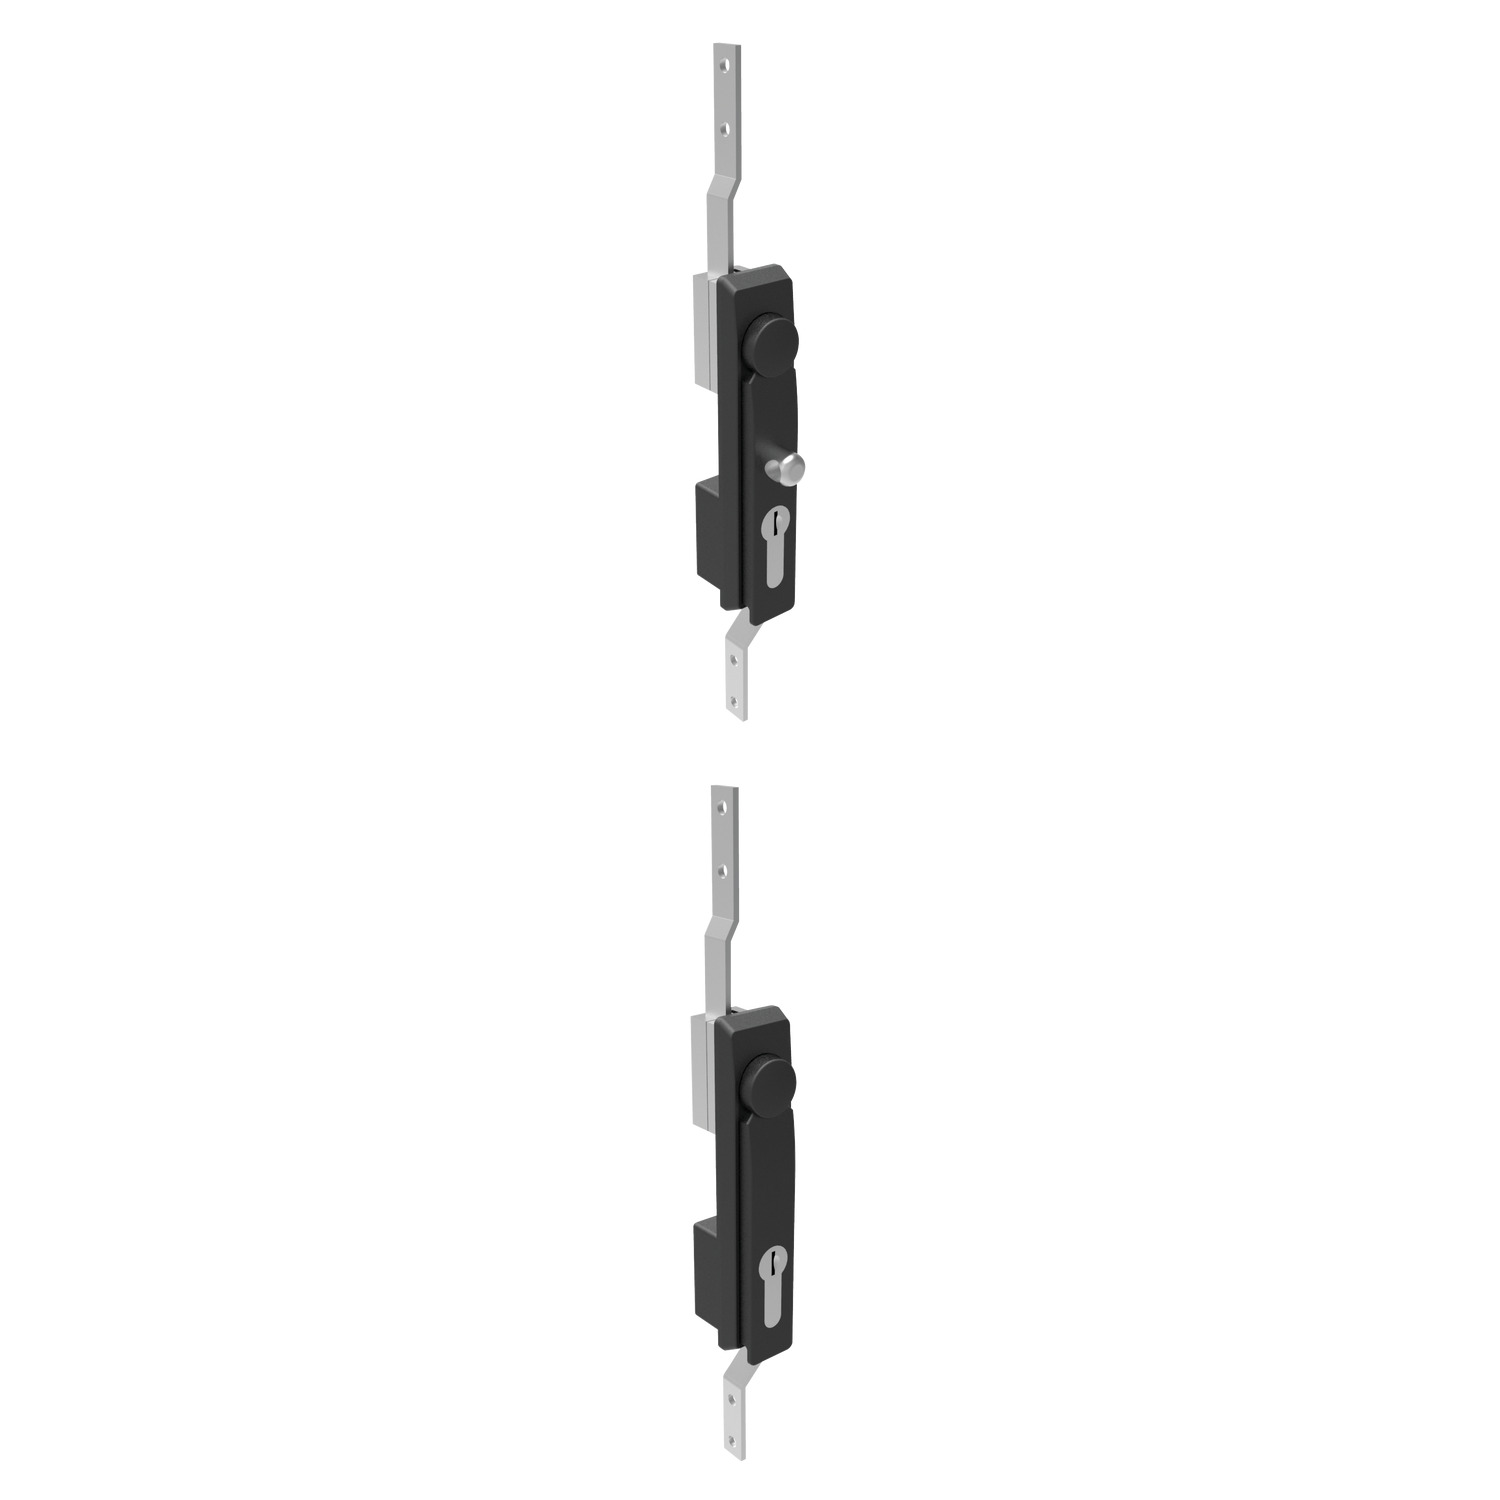 B2088.AW0010 Swing Handles with 3 point latching rod control